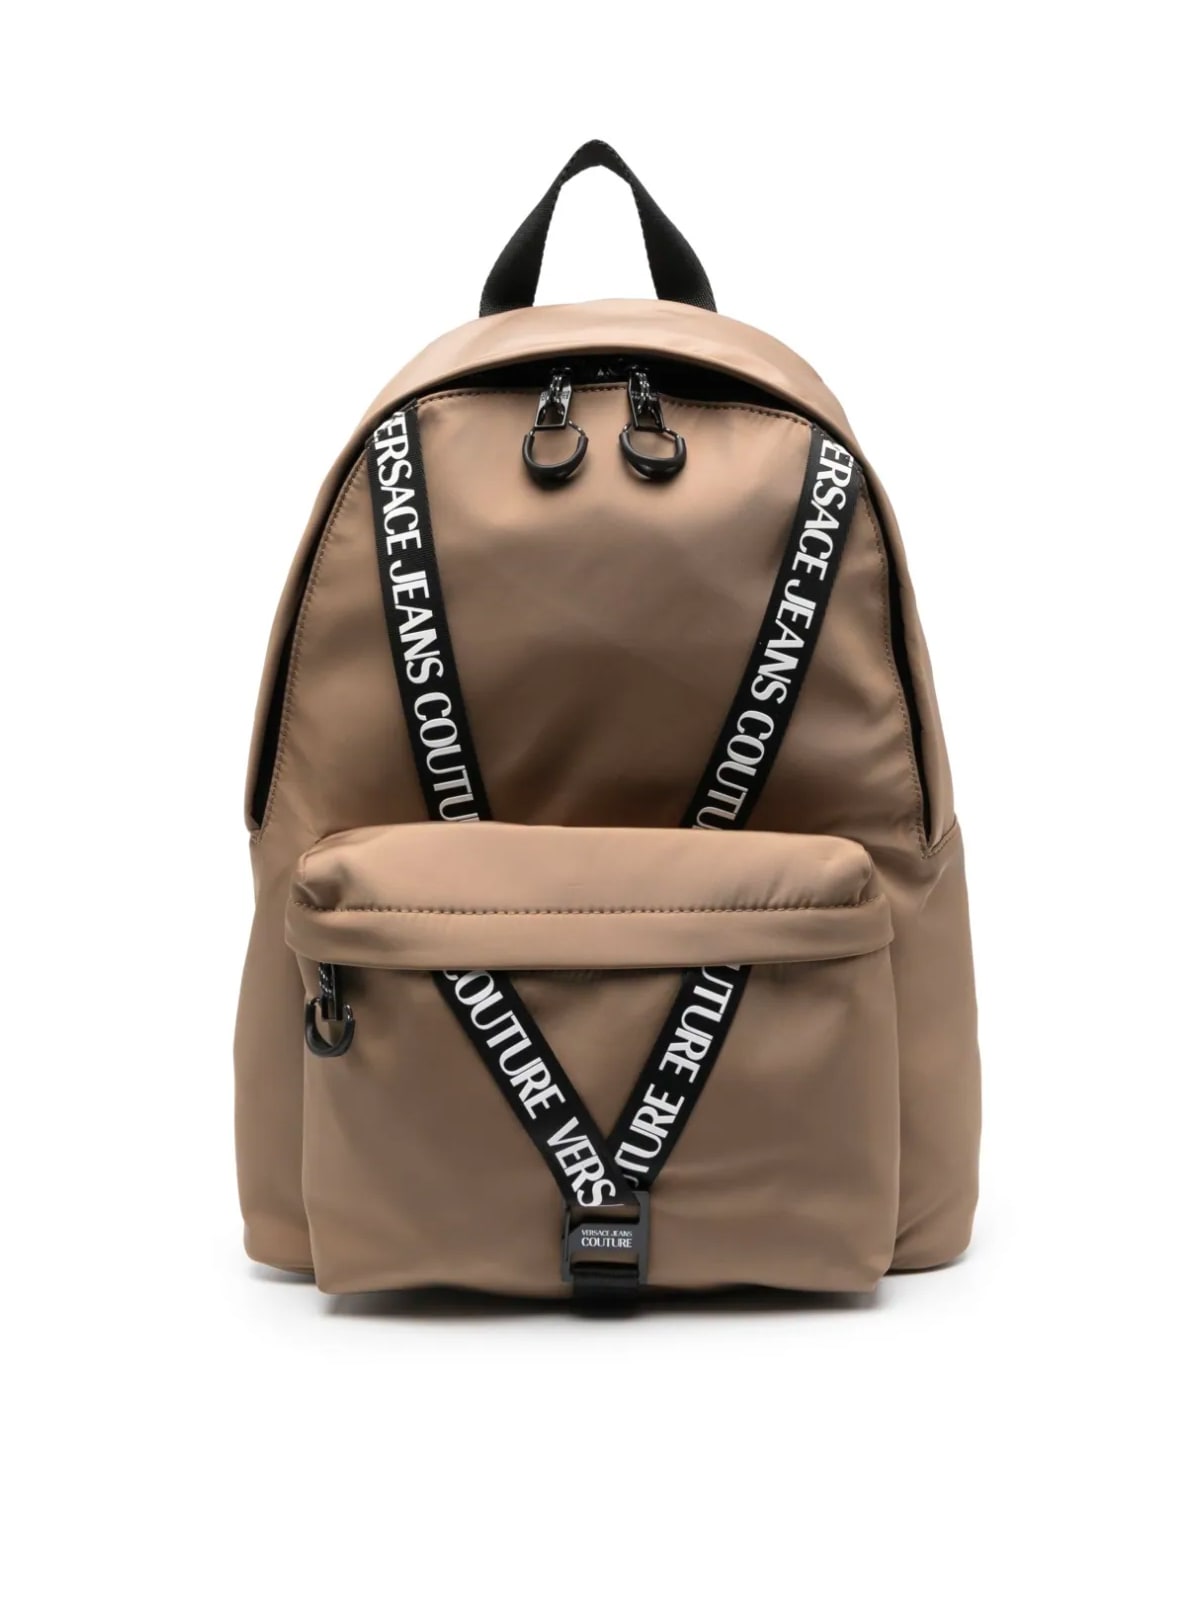 Versace Jeans Couture V Logo Tape Nylon Backpack - Tan